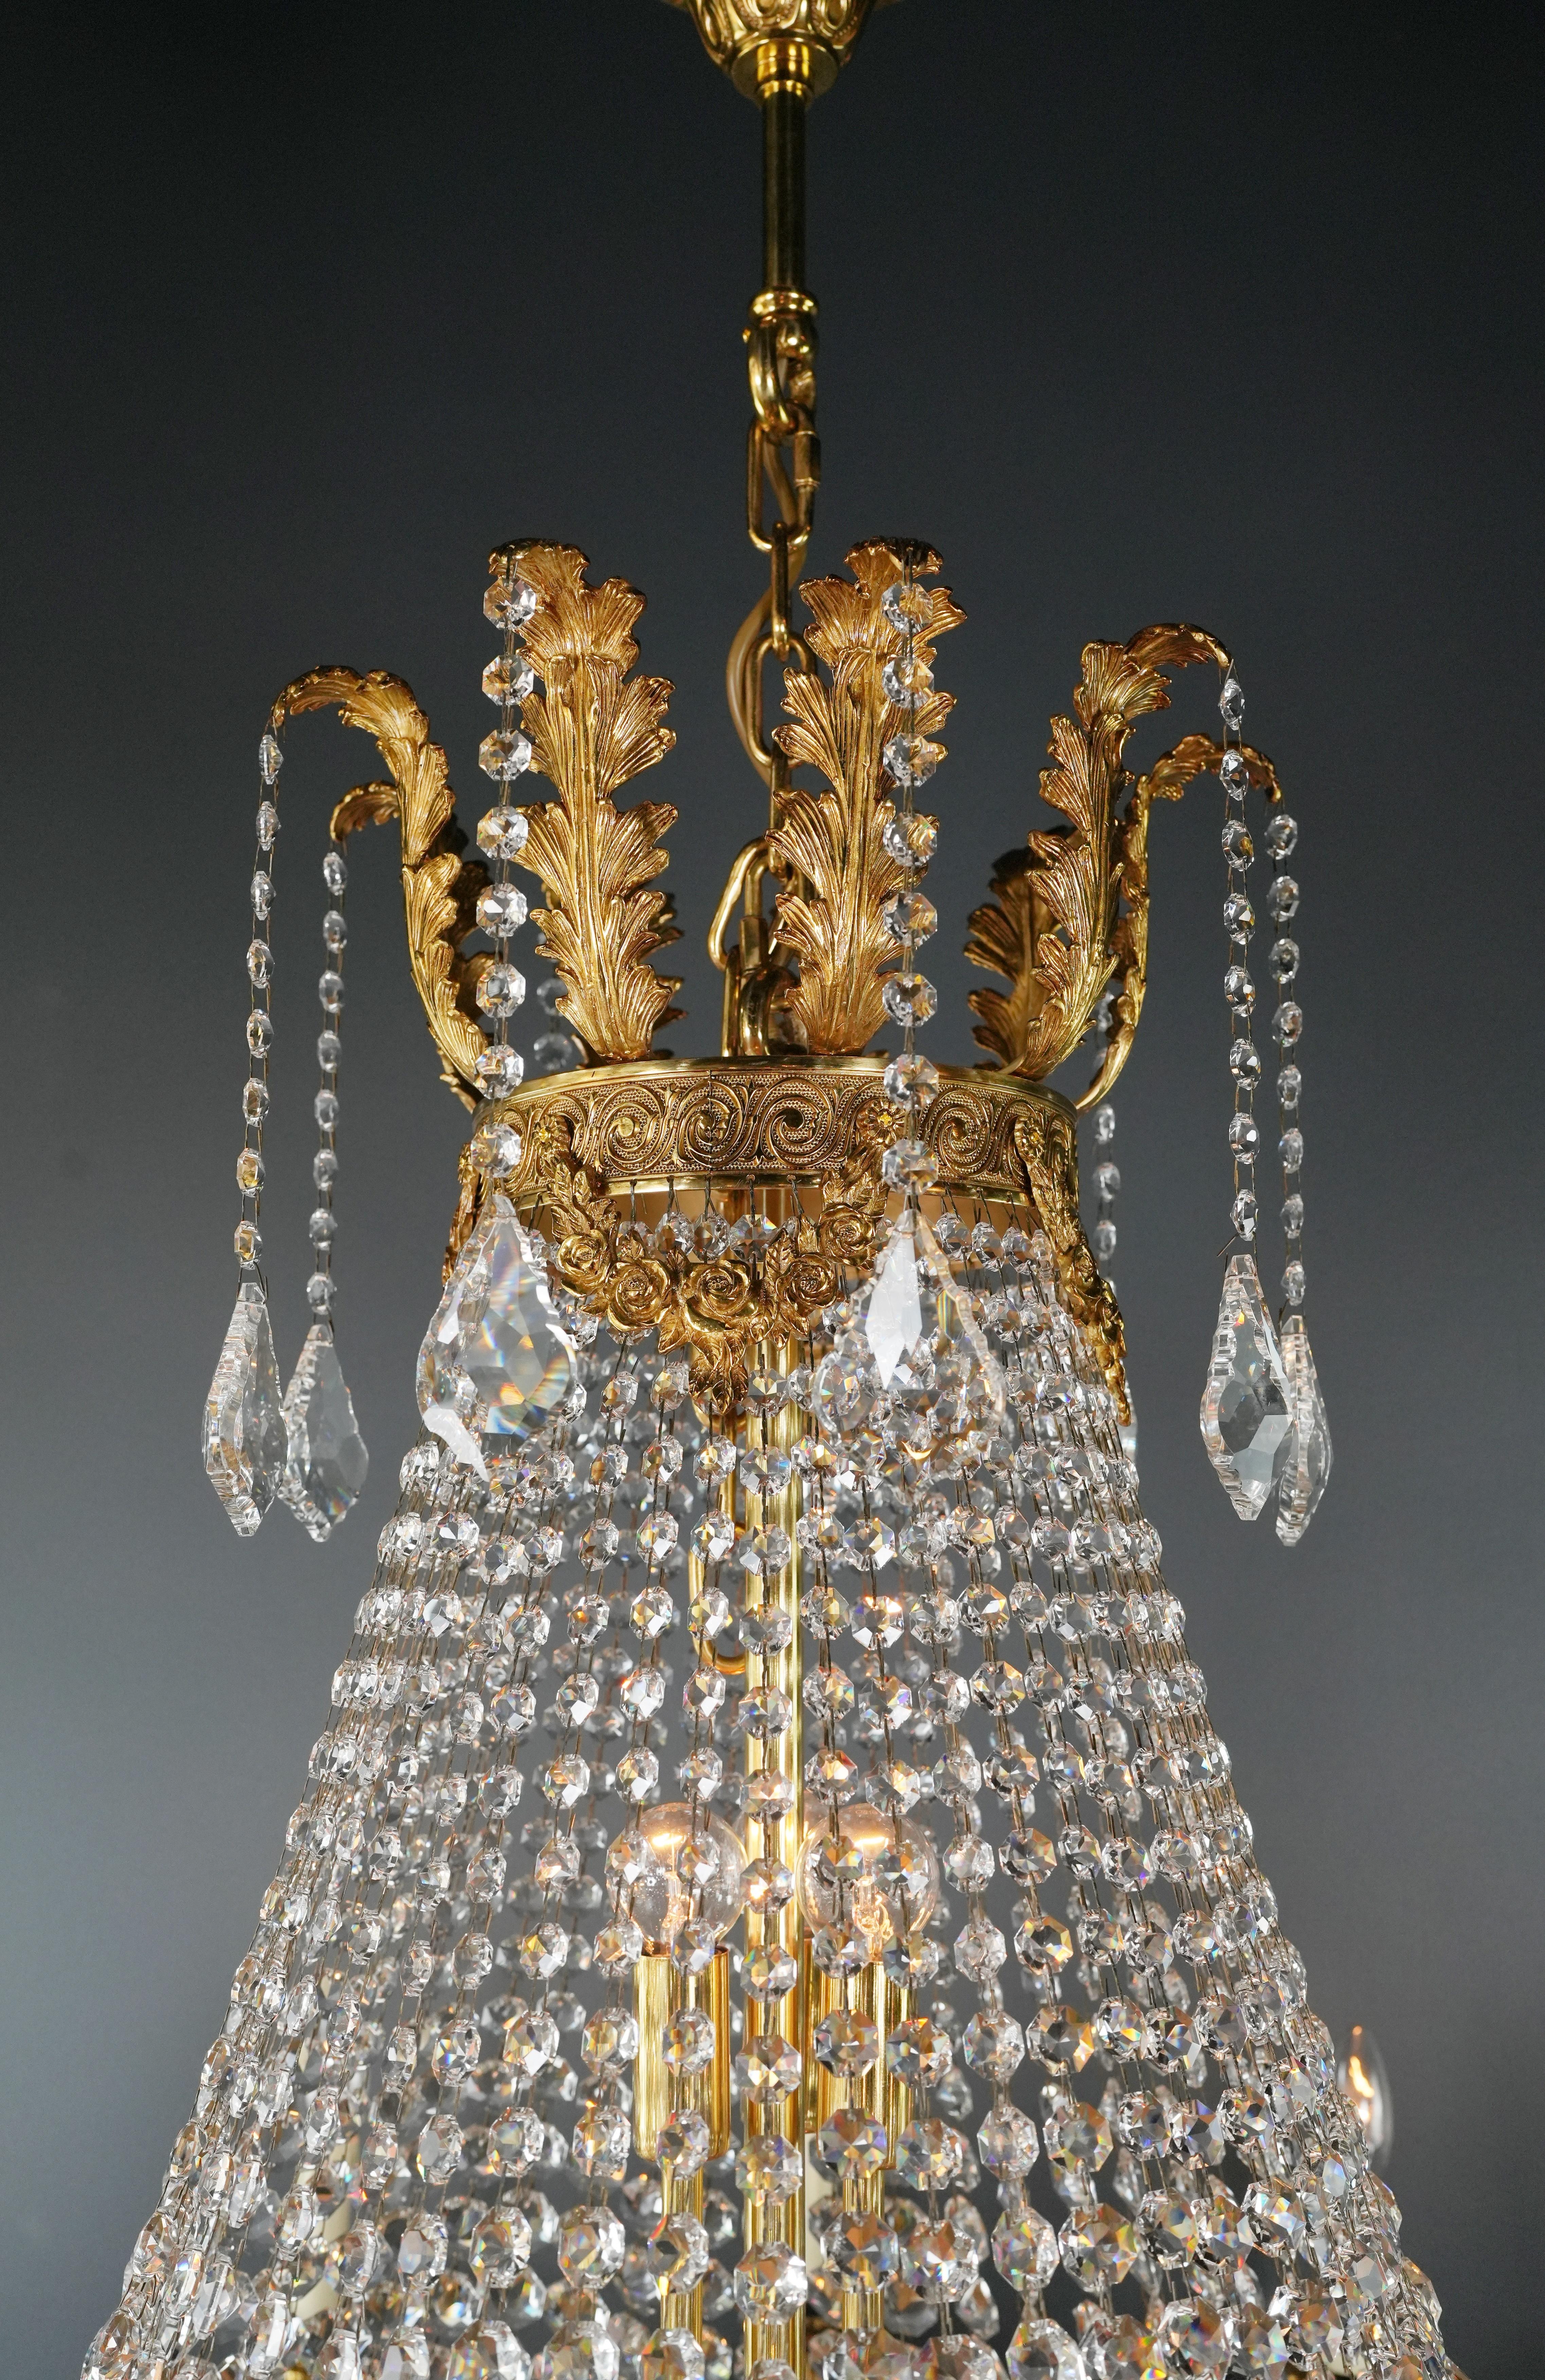 Wreat Brass Basket Empire Sac a Pearl Chandelier Crystal and Antique Gold For Sale 1